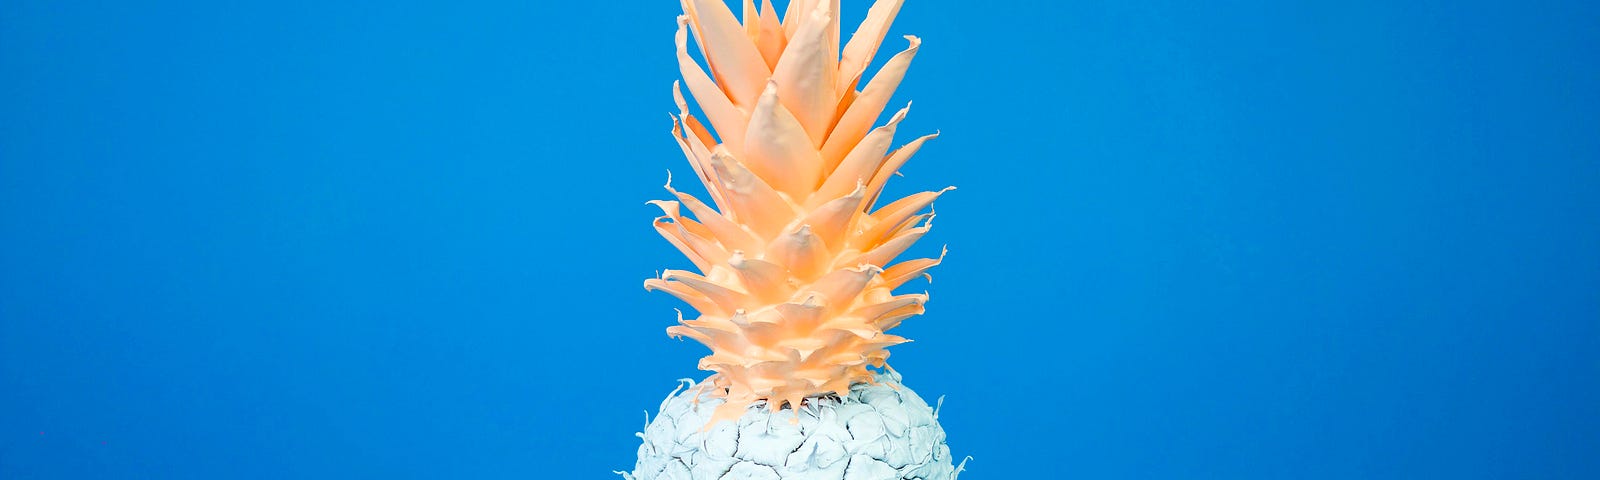 pineapple painted in blue and golden